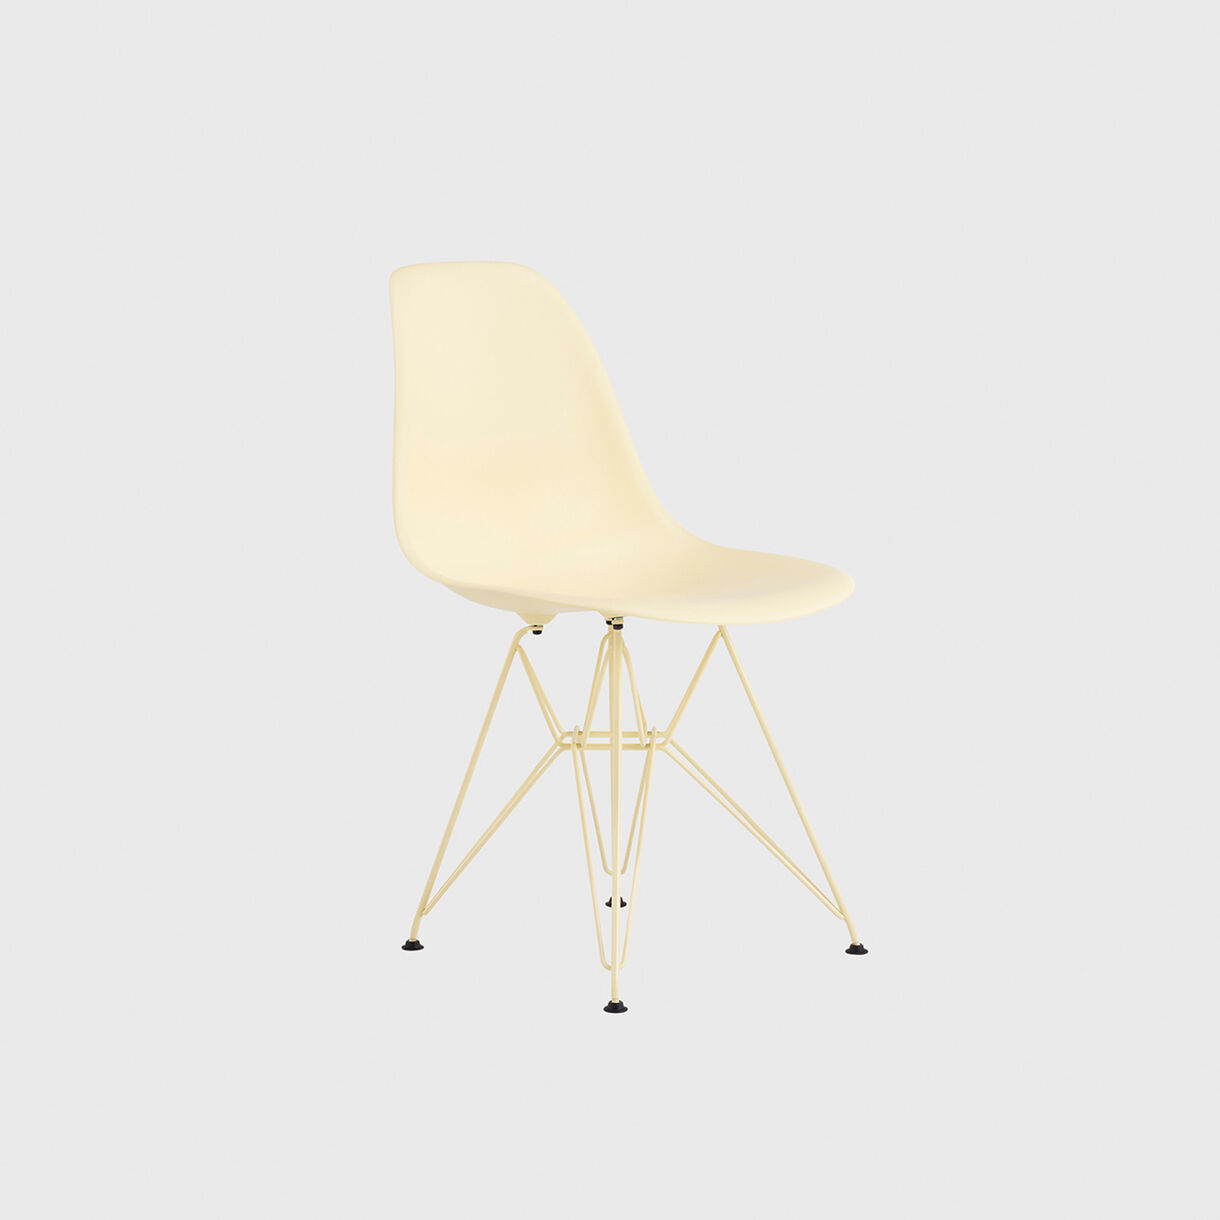 HM x Hay Eames Moulded Plastic Side Chair, Wire Base, Powder Yellow